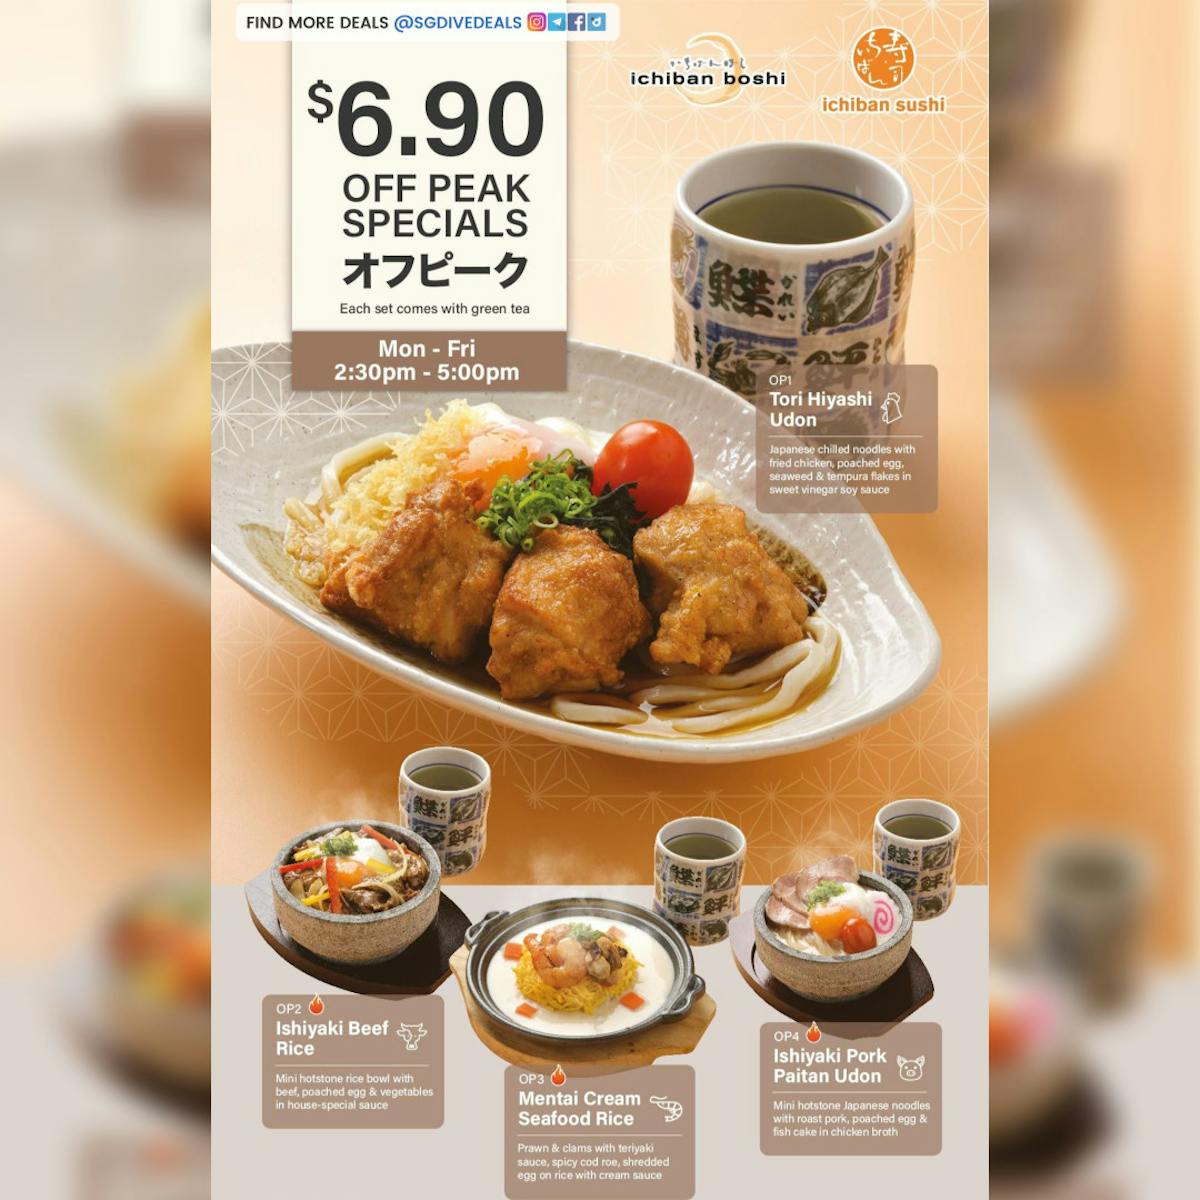 Special Japanese set meals at $6.90 Harboufront